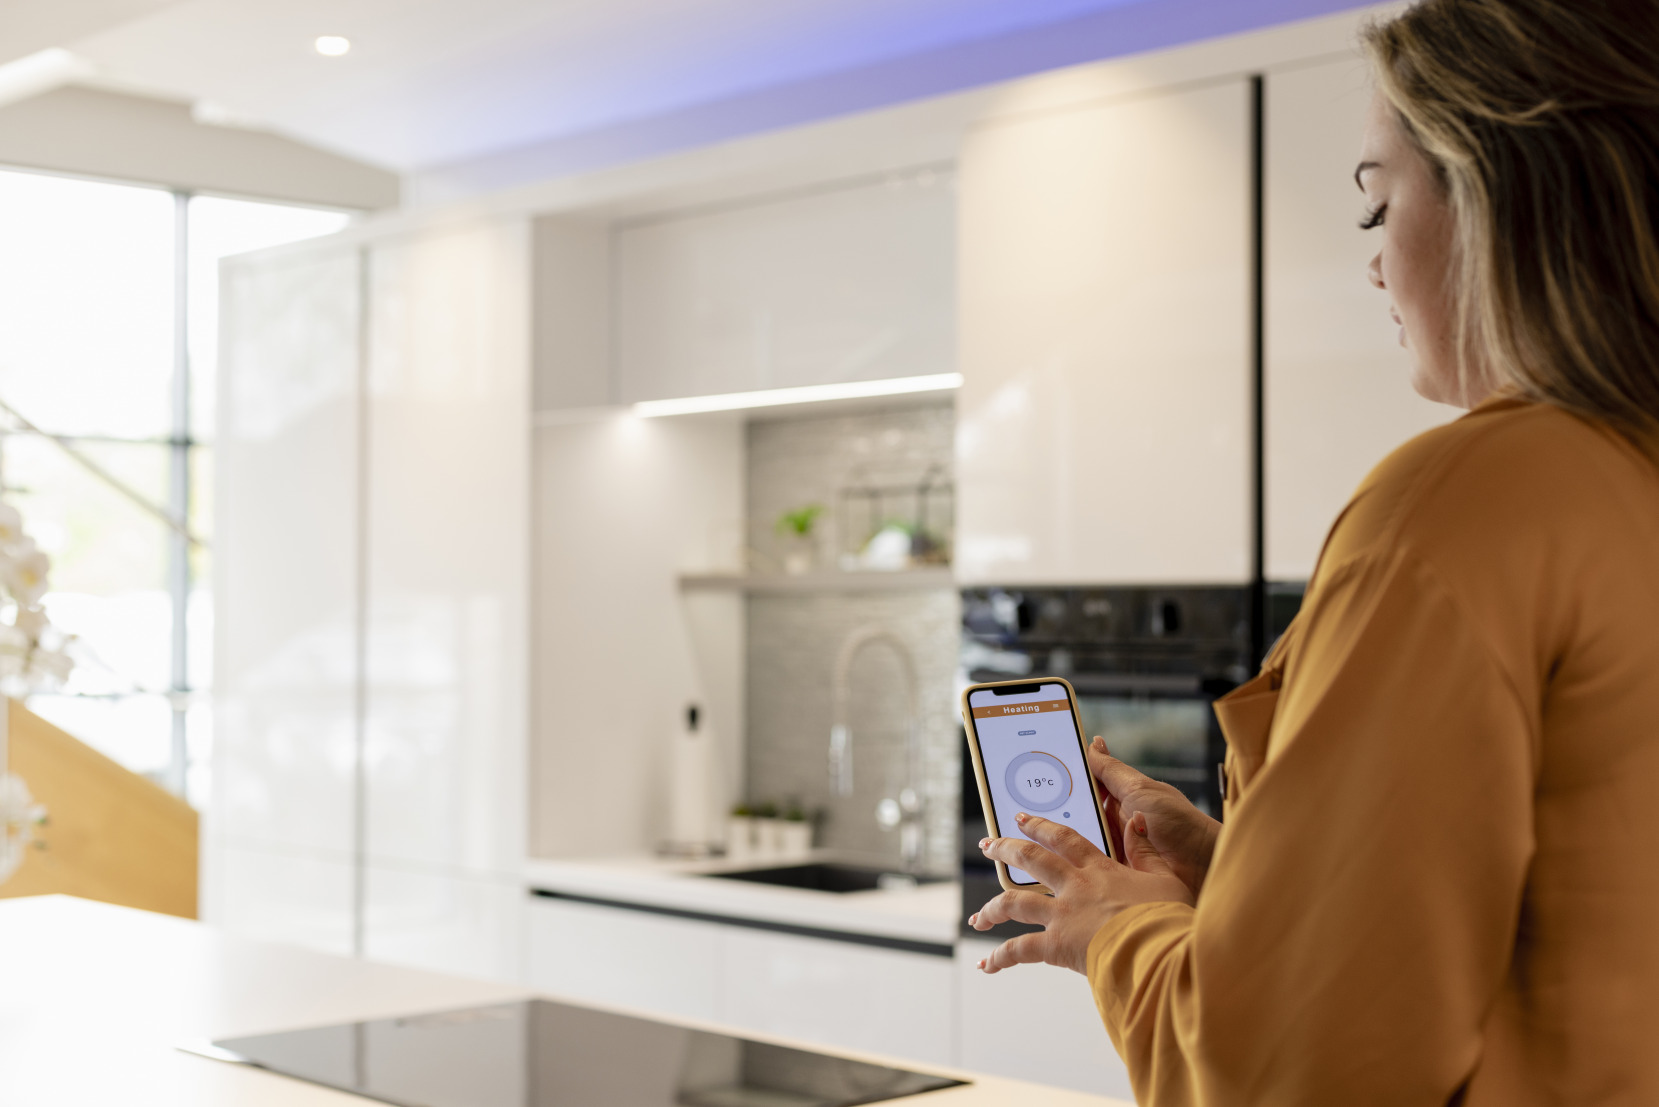 A homeowner stands in a contemporary white kitchen and controls home appliances using an app on their phone.